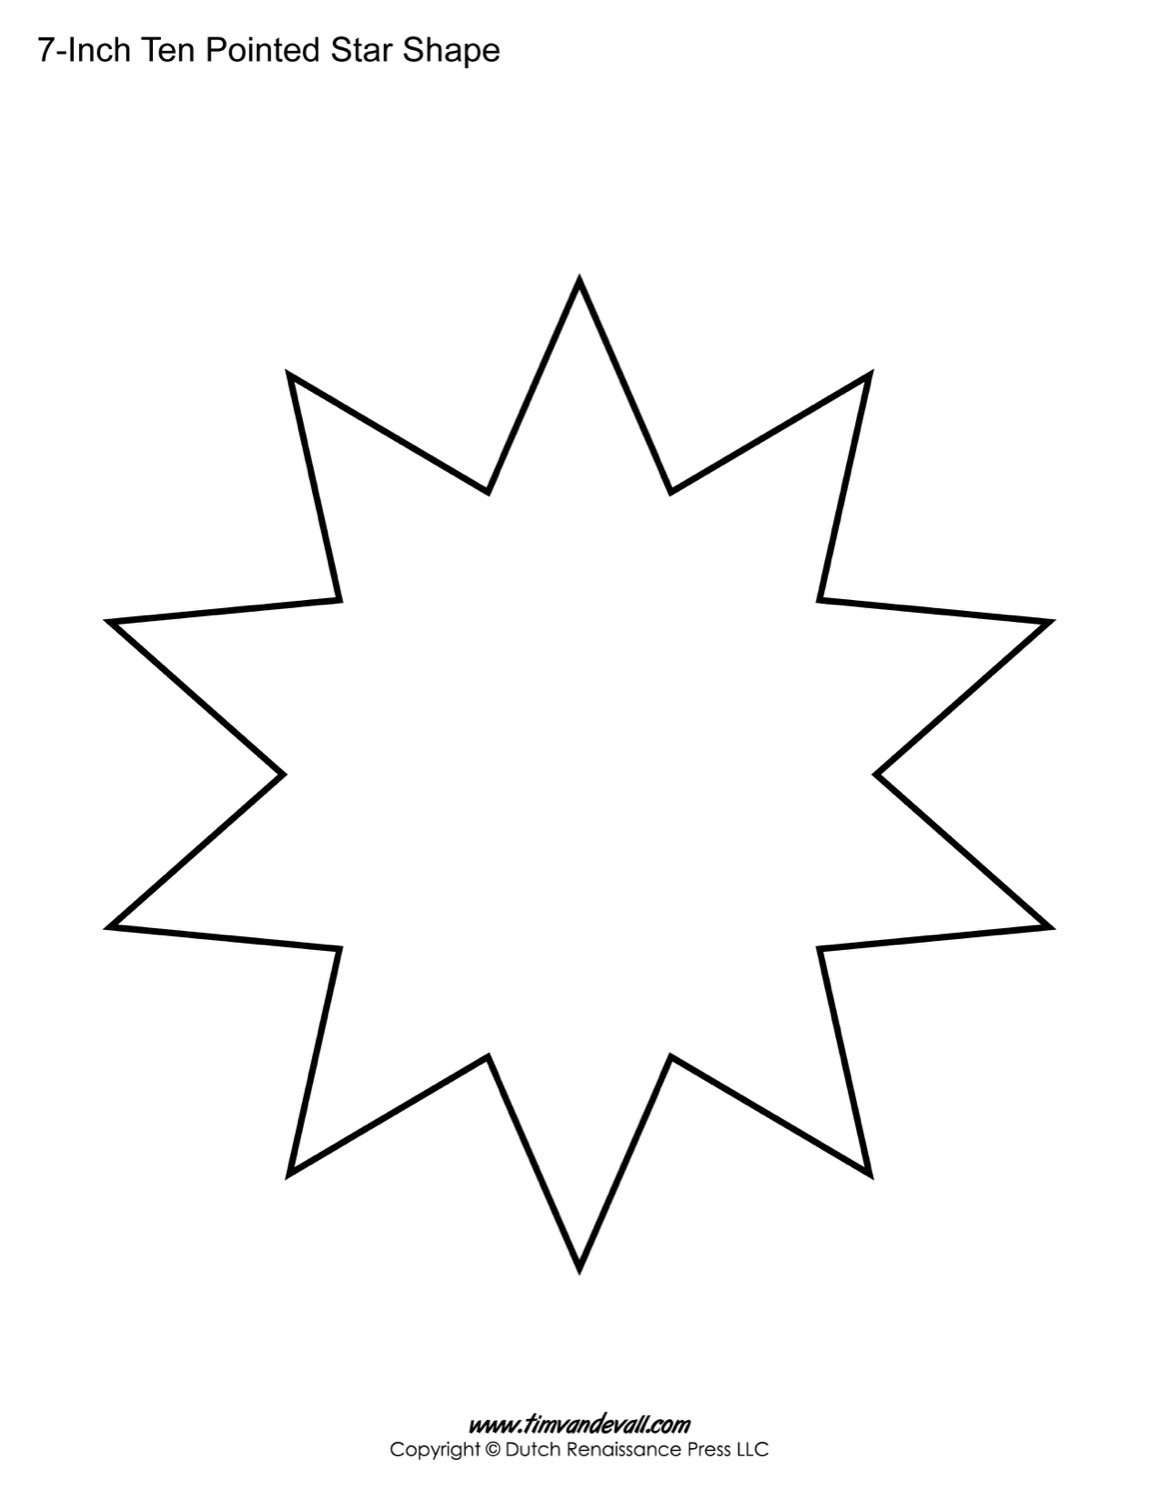 5 Point Star Drawing At GetDrawings Com Free For Personal Use Blank